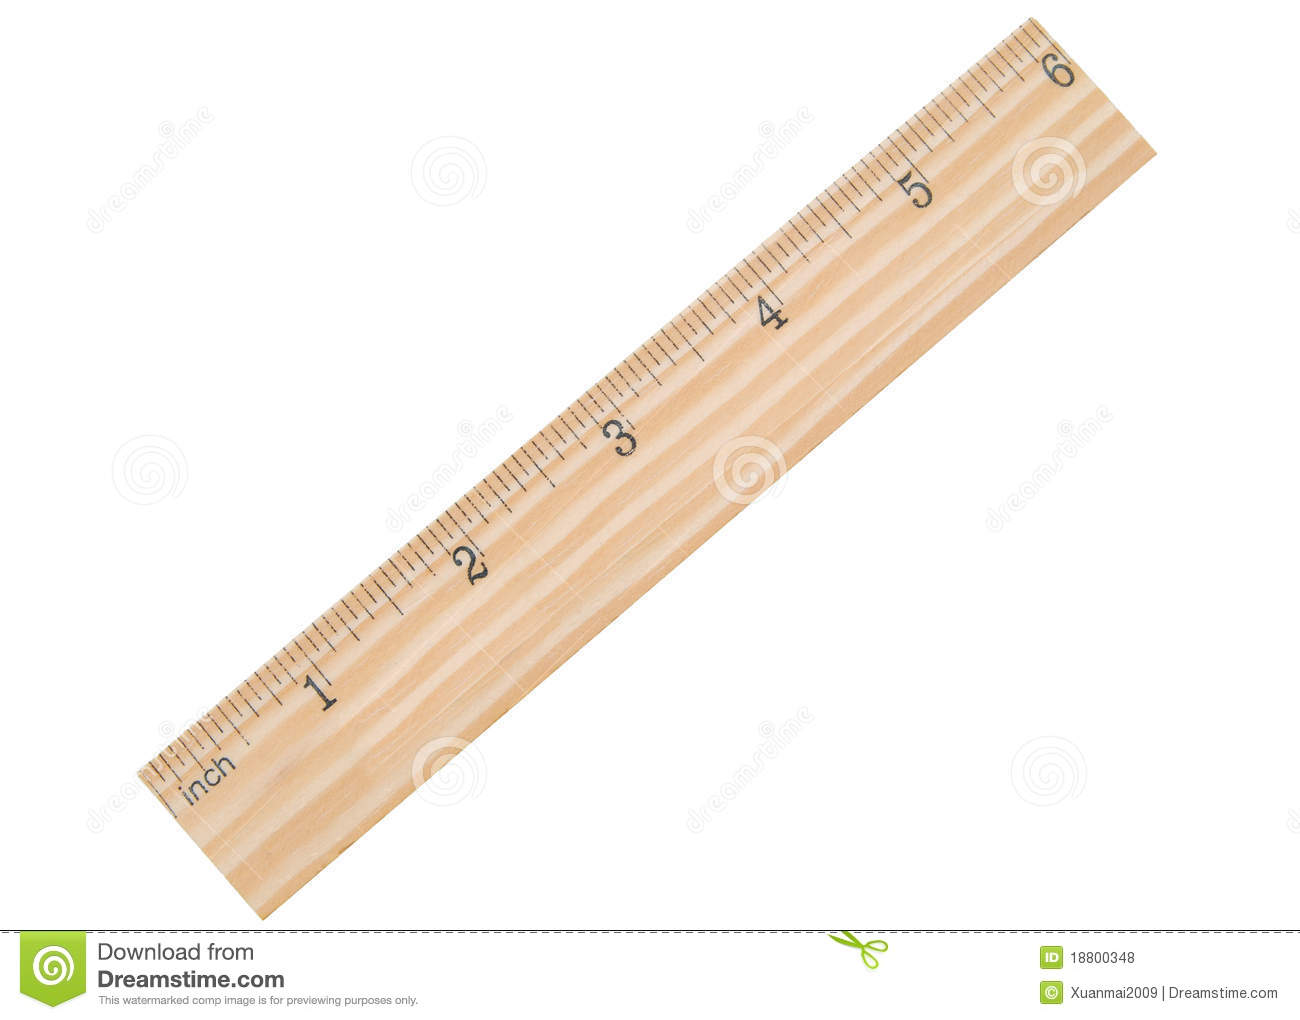 Clipart School Ruler A 6 Inch School Ruler Isolated